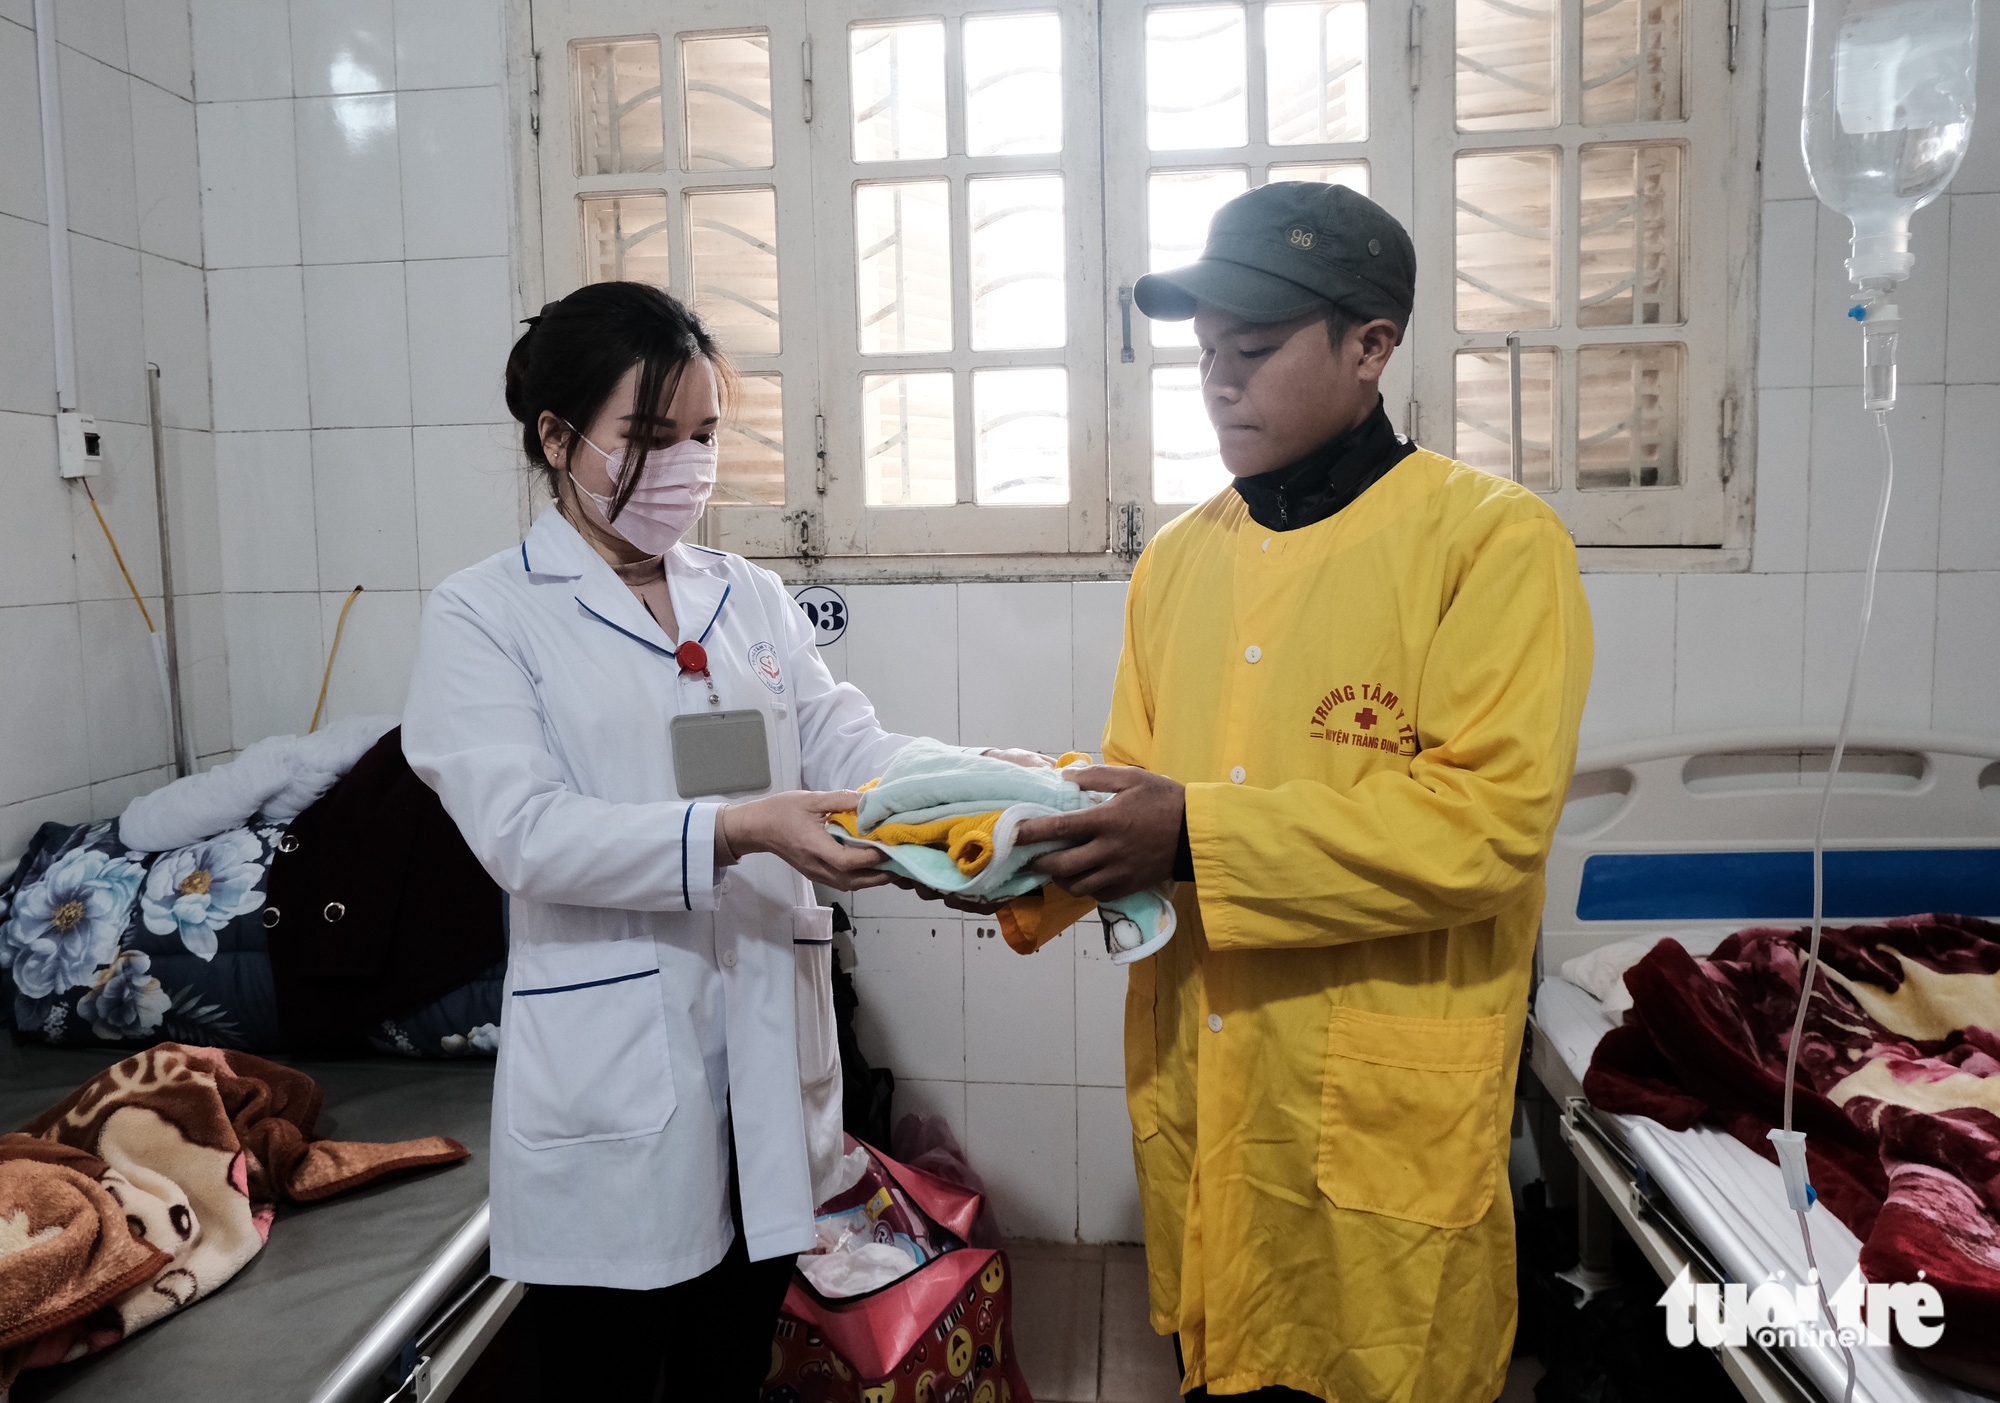 Van Anh, a nurse at the Trang Dinh General Hospital, gives clothes for a mother and her child to their family member. Photo: Ha Thanh / Tuoi Tre